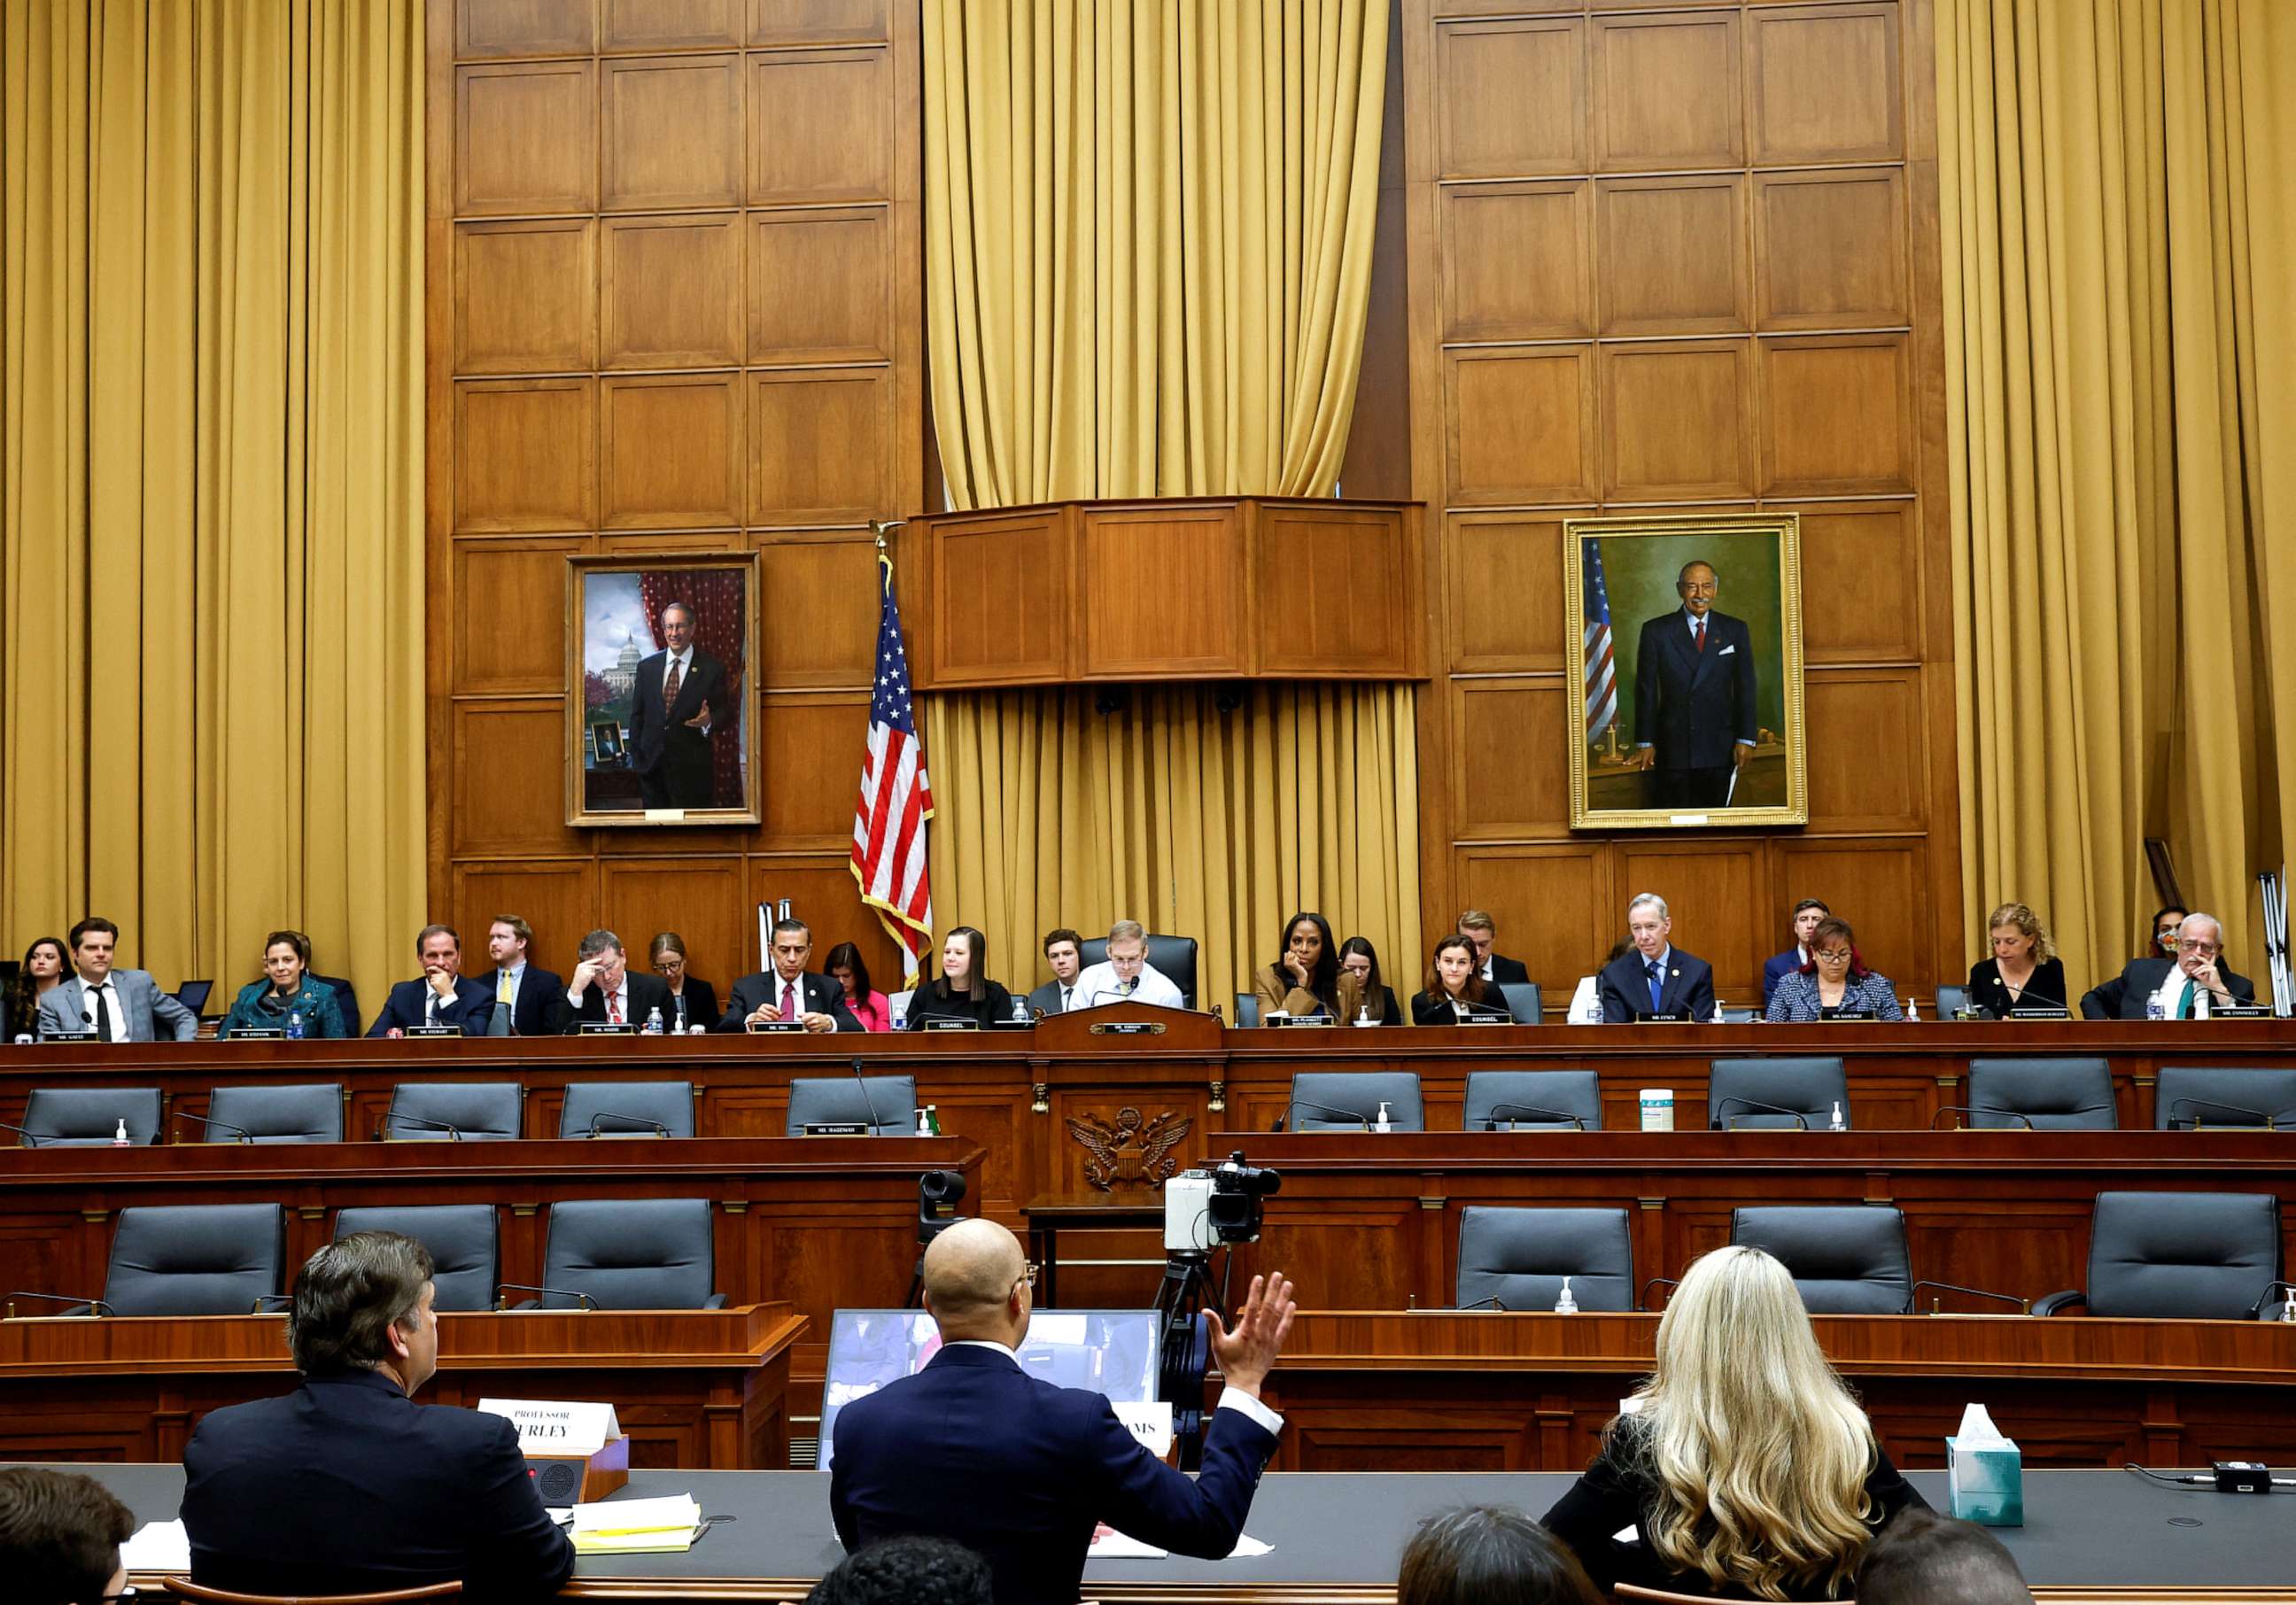 PHOTO: Witnesses testify before the House Judiciary Weaponization of the Federal Government Subcommittee during a hearing about the politicization of the FBI and Department of Justice and attacks on American civil liberties, in Washington, Feb. 9, 2023.